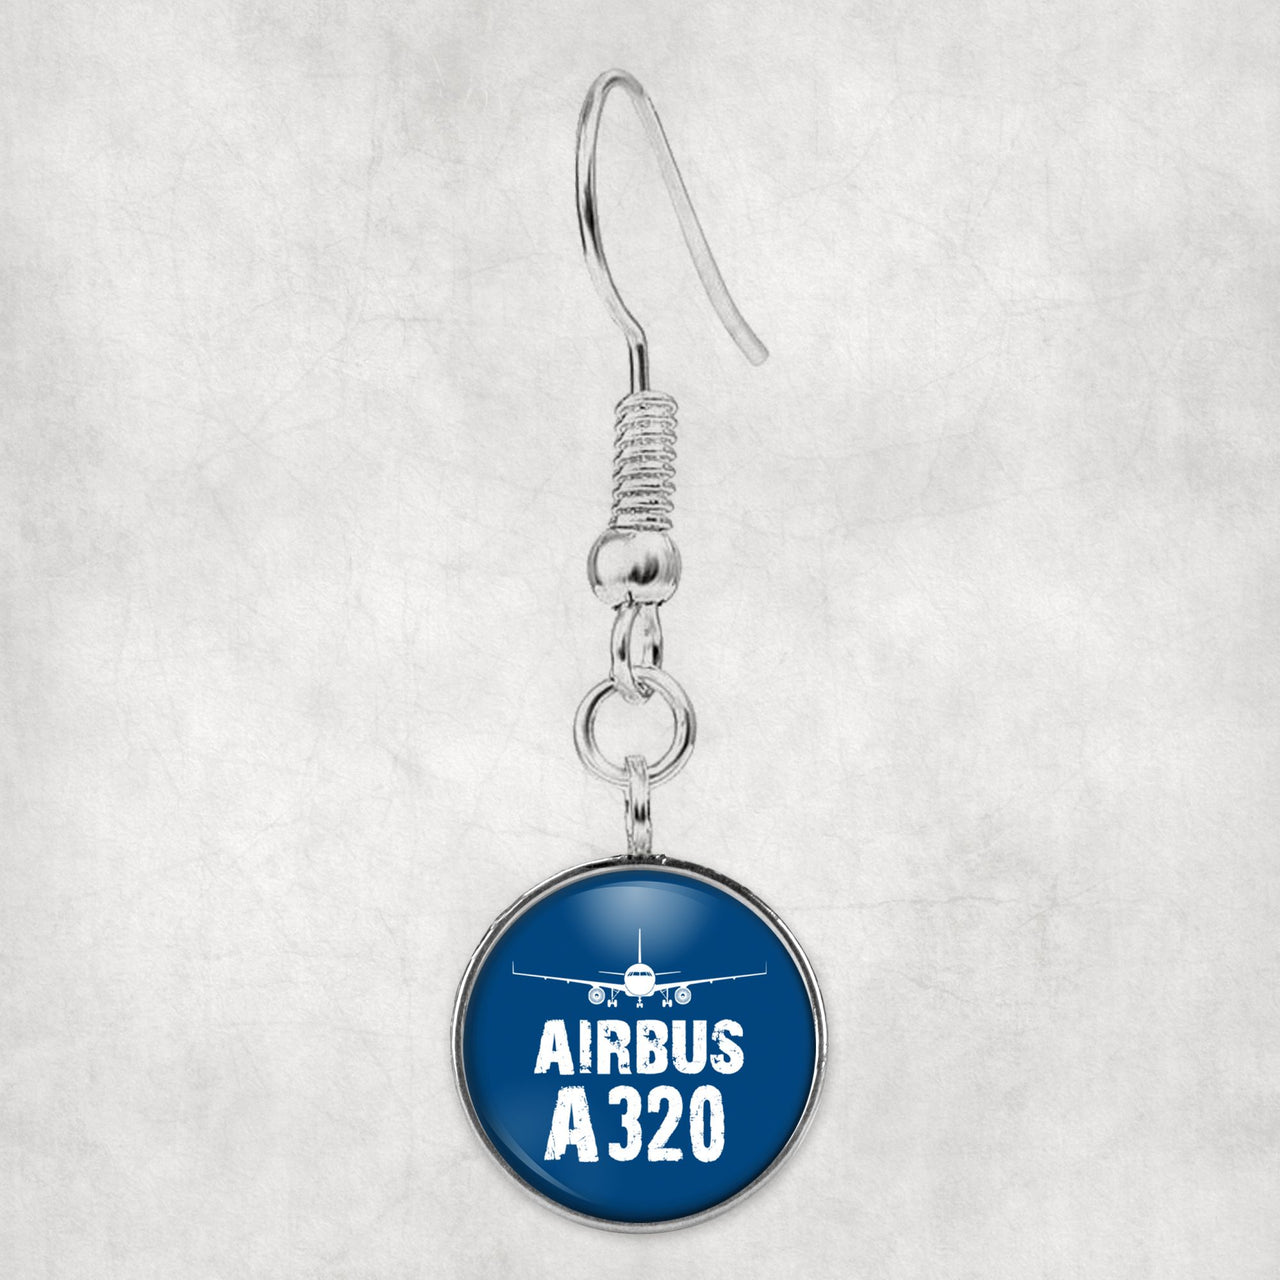 Airbus A320 & Plane Designed Earrings